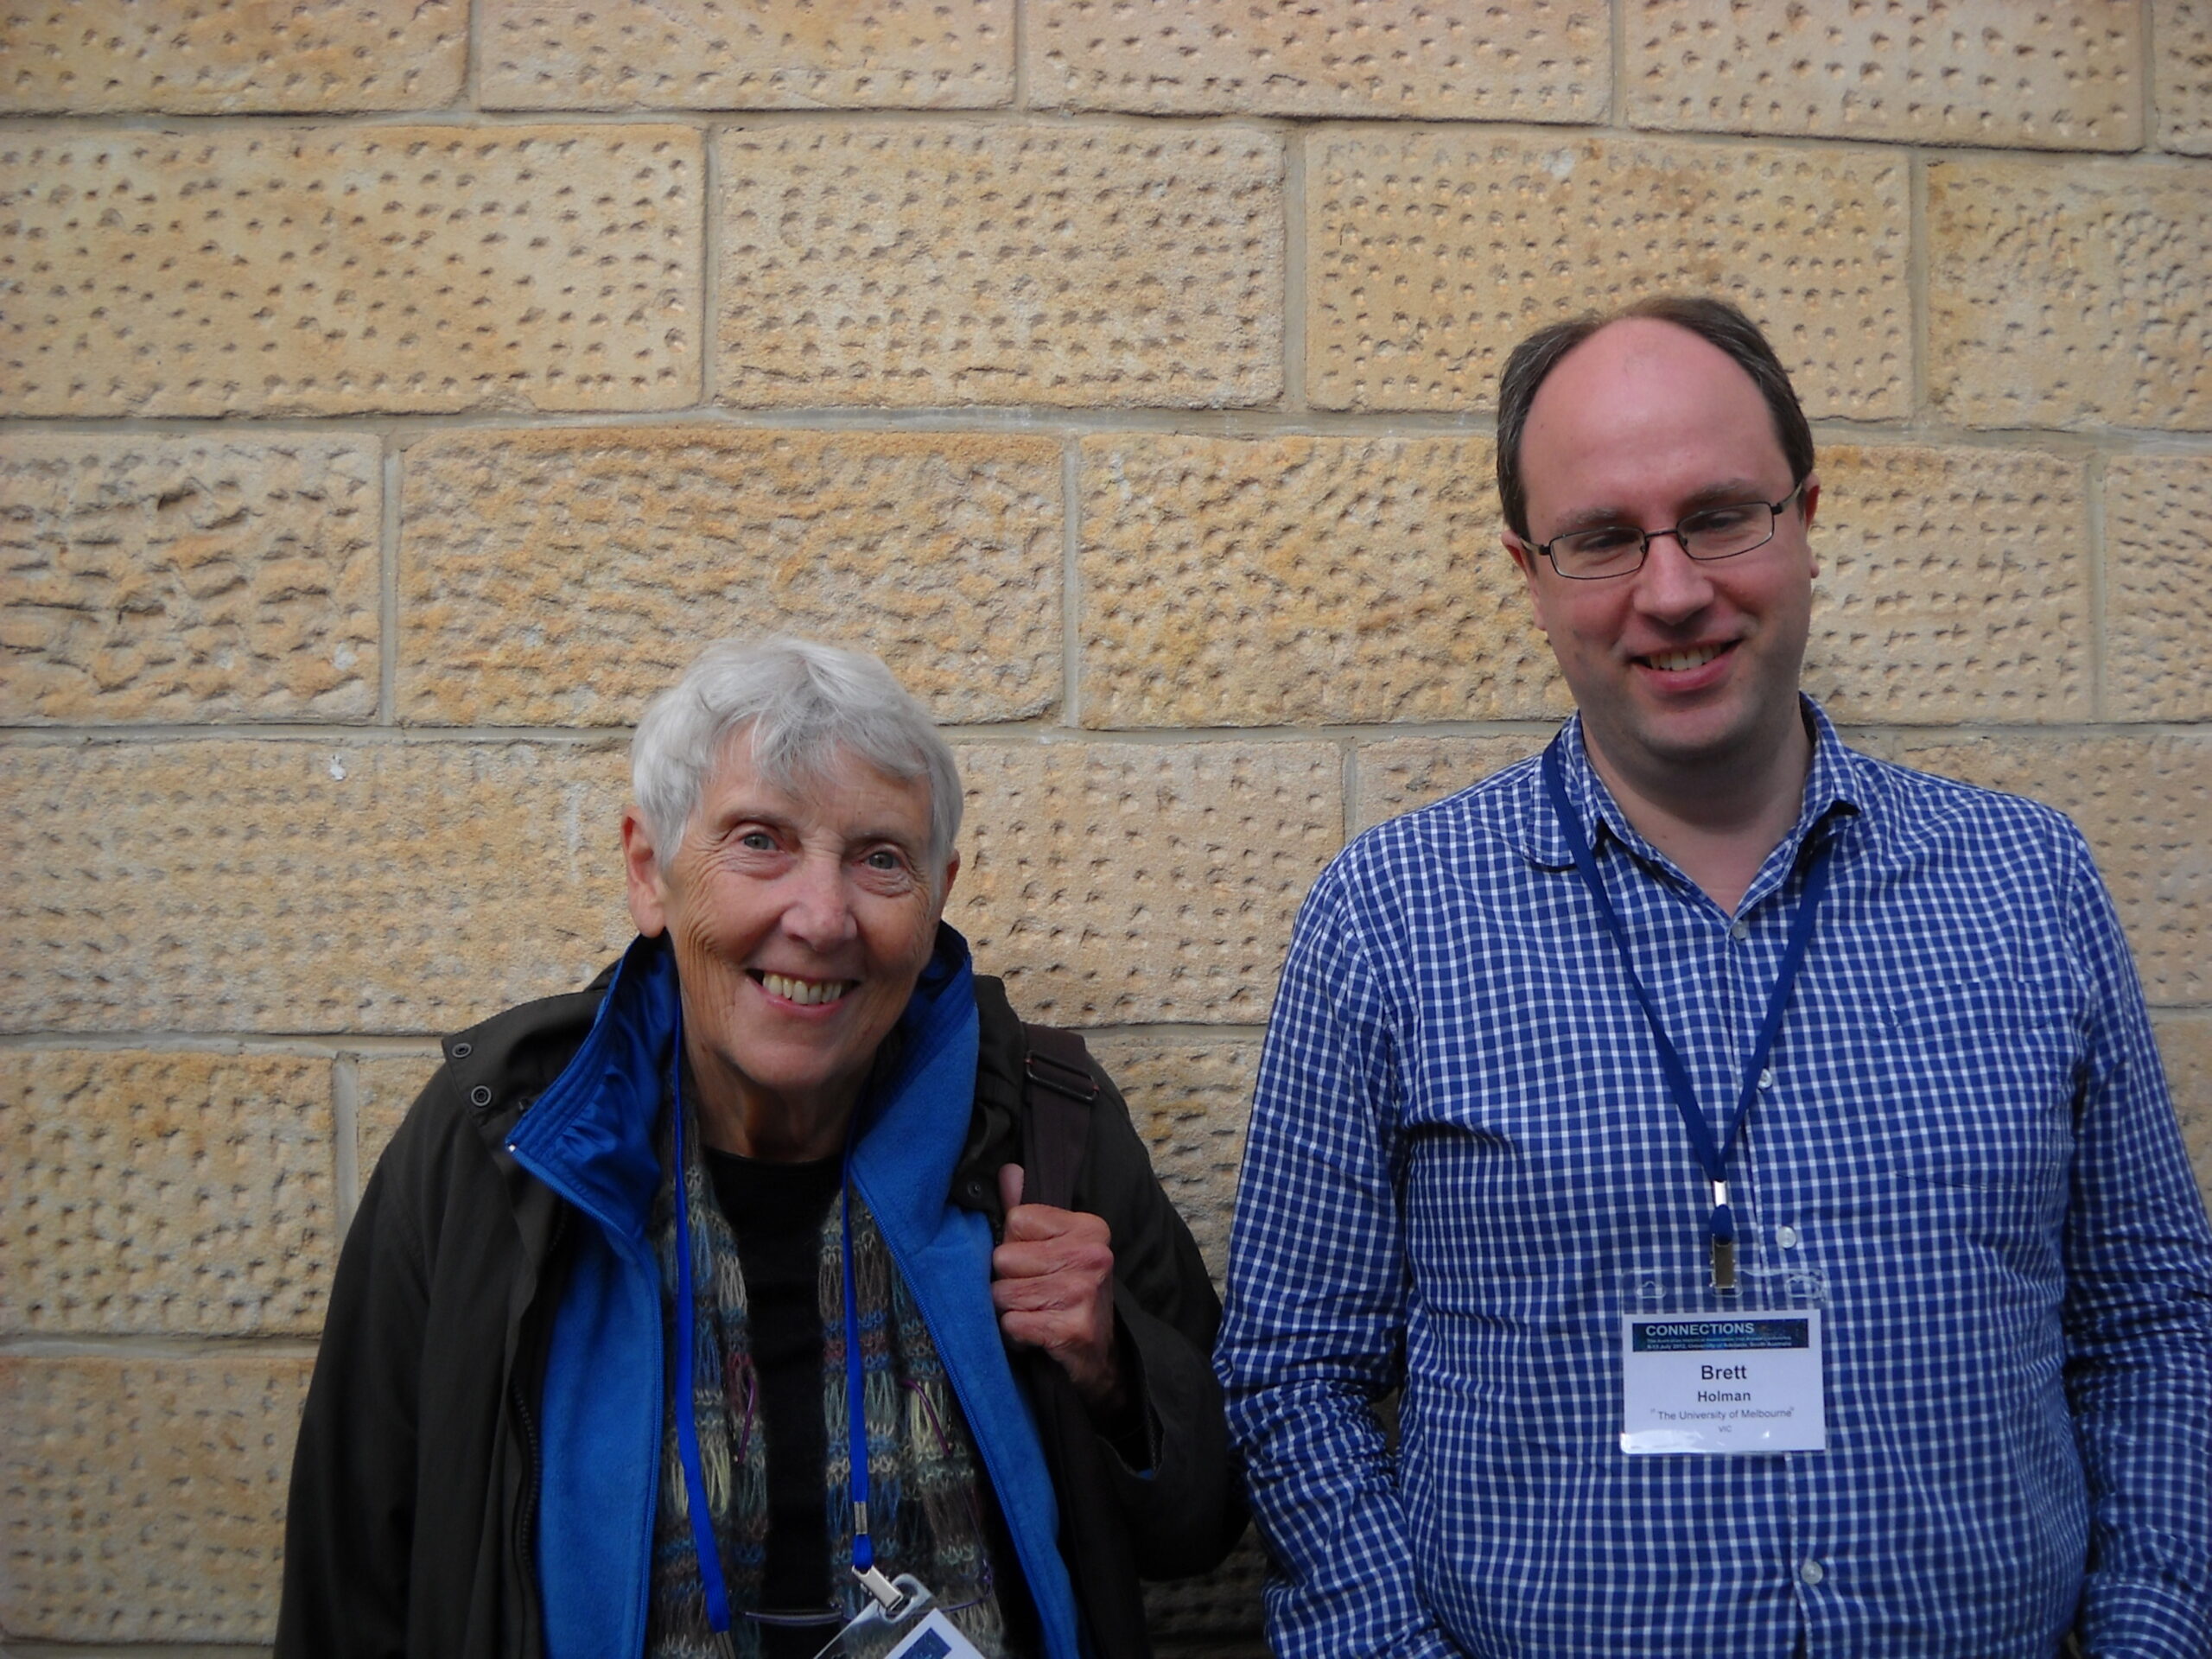 Jill Roe standing next to Brett Holman at the Australian Historical Association conference in Adelaide, 2012.